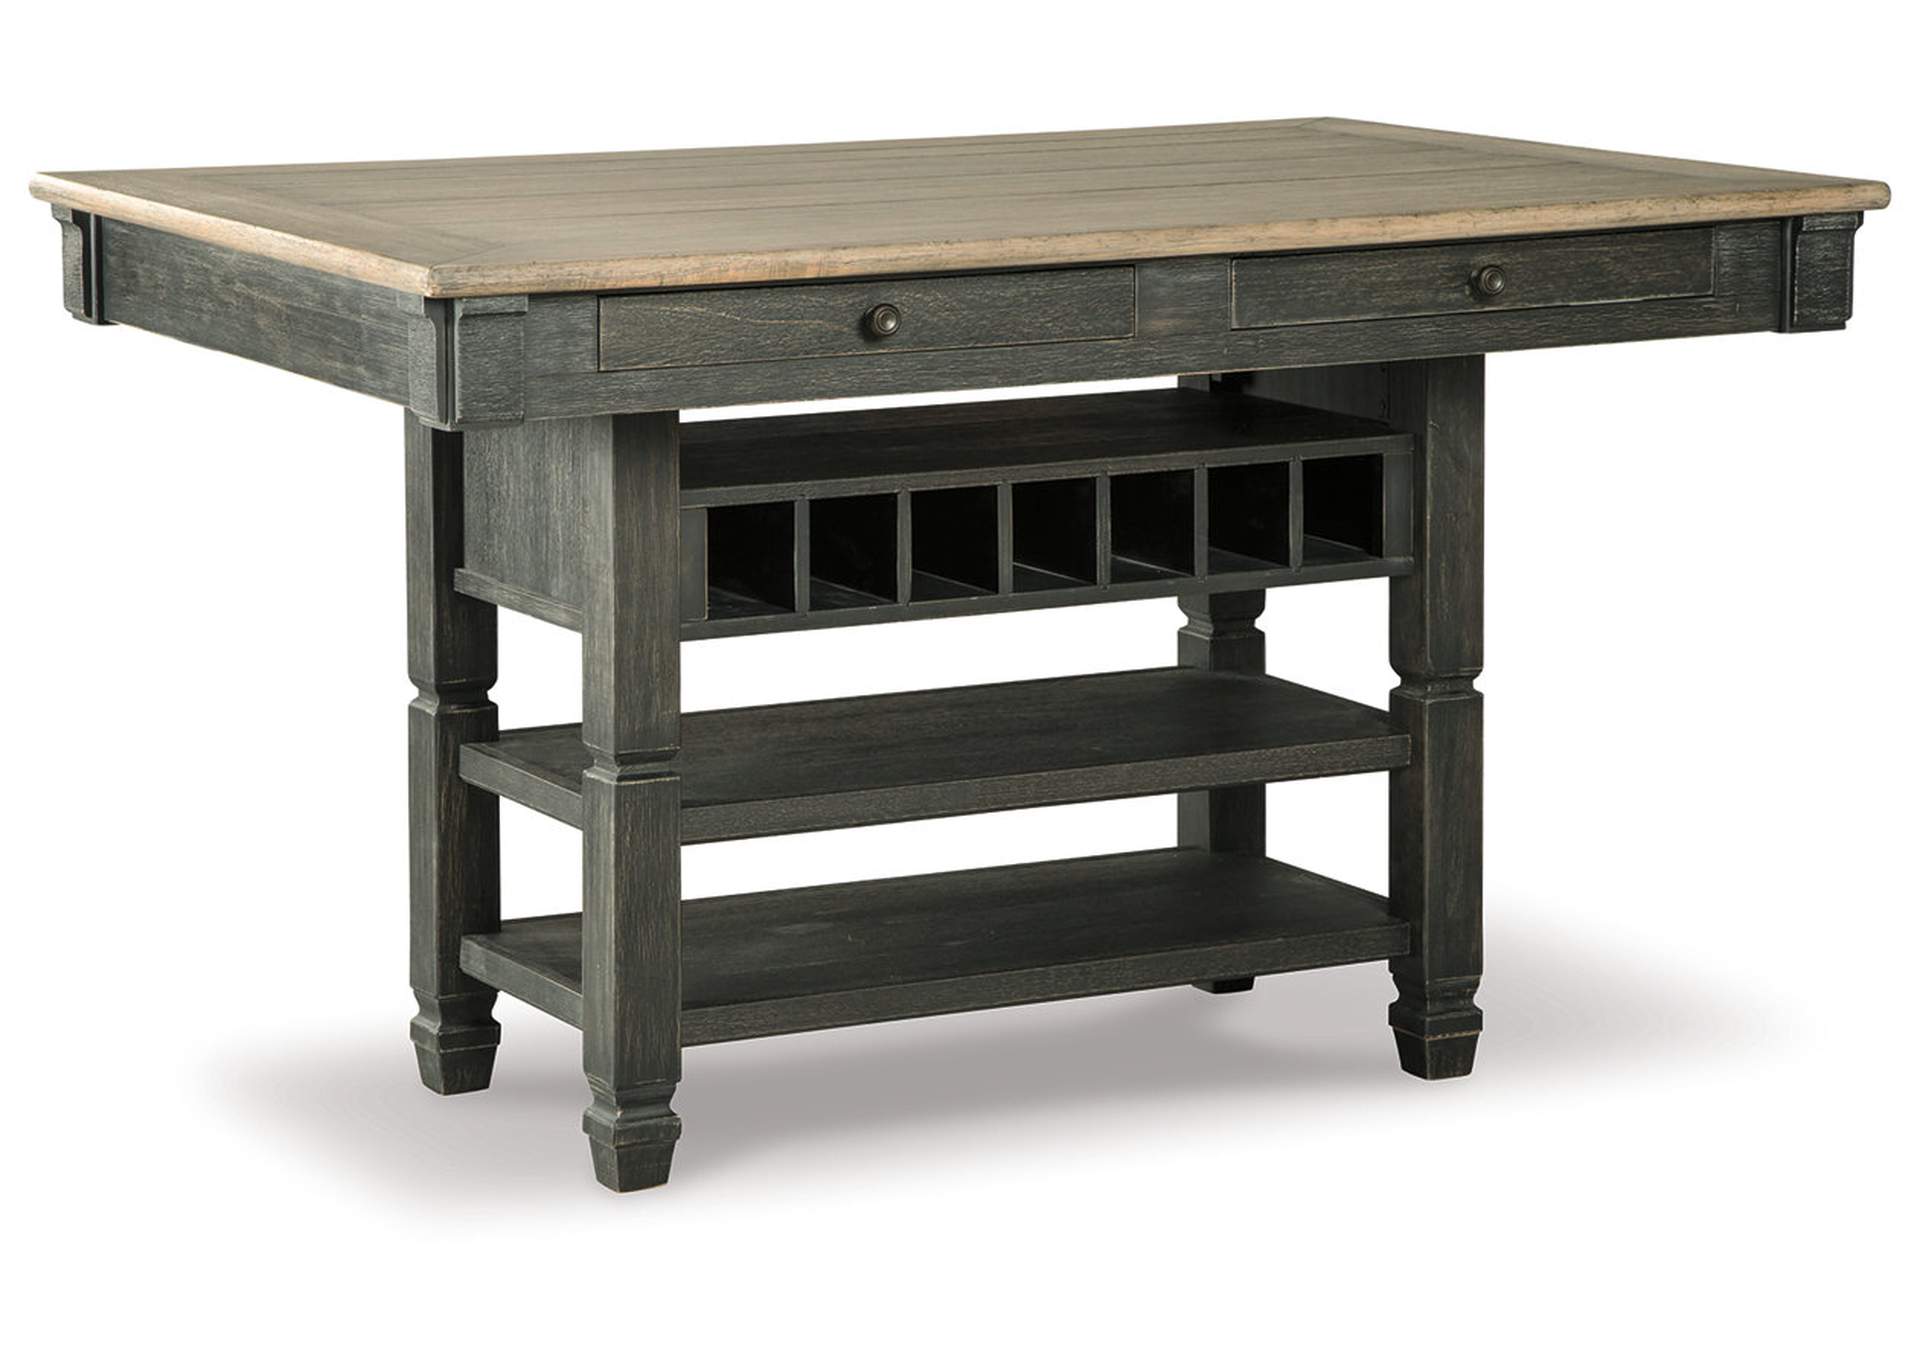 Tyler Creek Counter Height Dining Table and 4 Barstools and Bench,Signature Design By Ashley